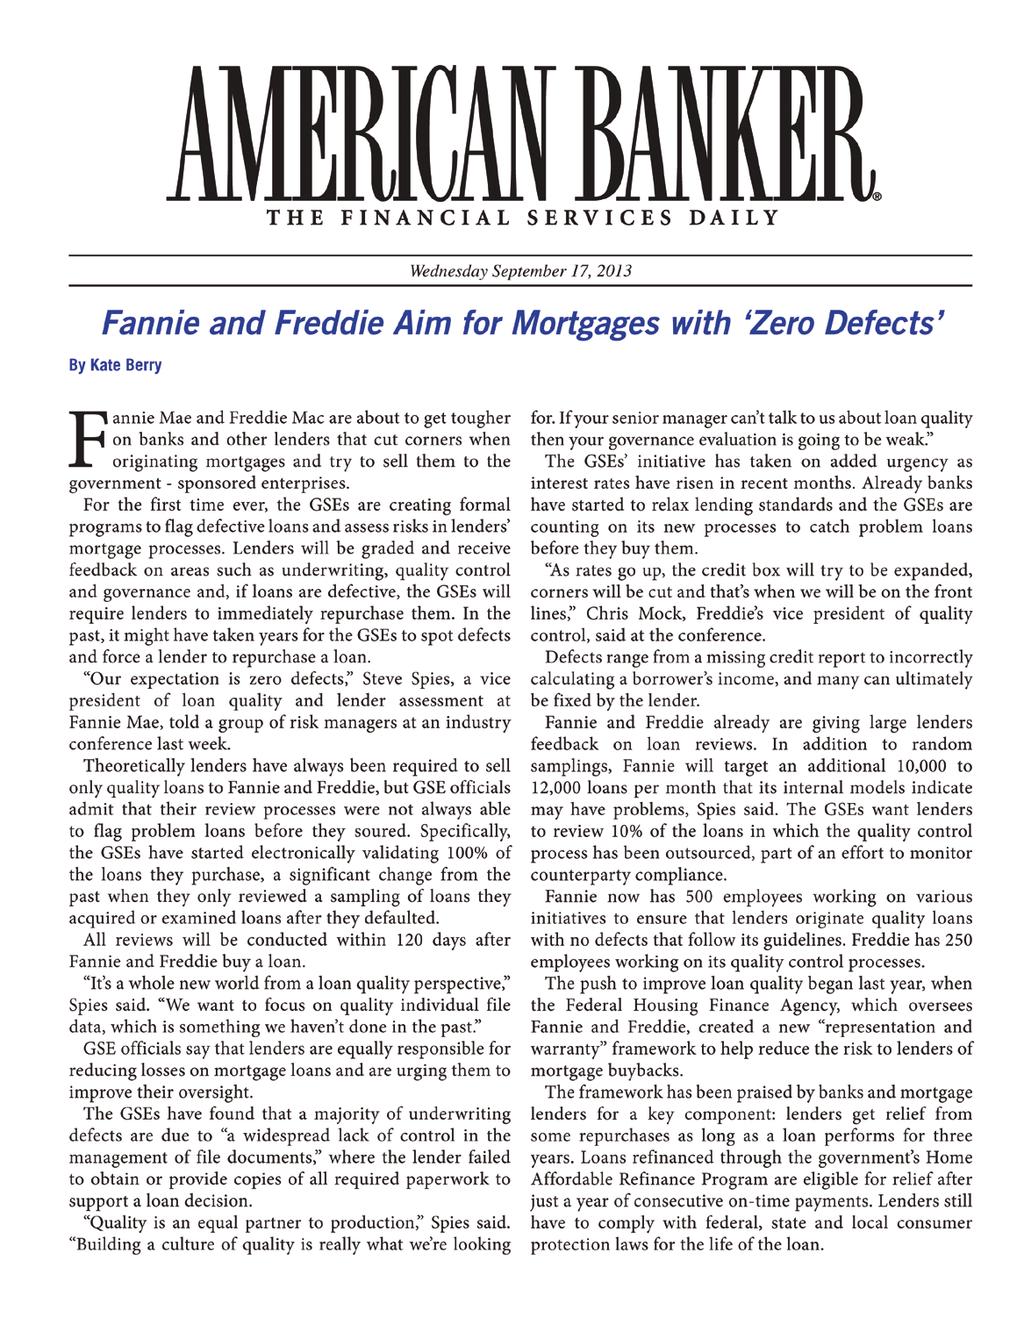 Page 9 Additional resources Fannie and Freddie Aim for Mortgages with Zero Defects By Kate Berry in